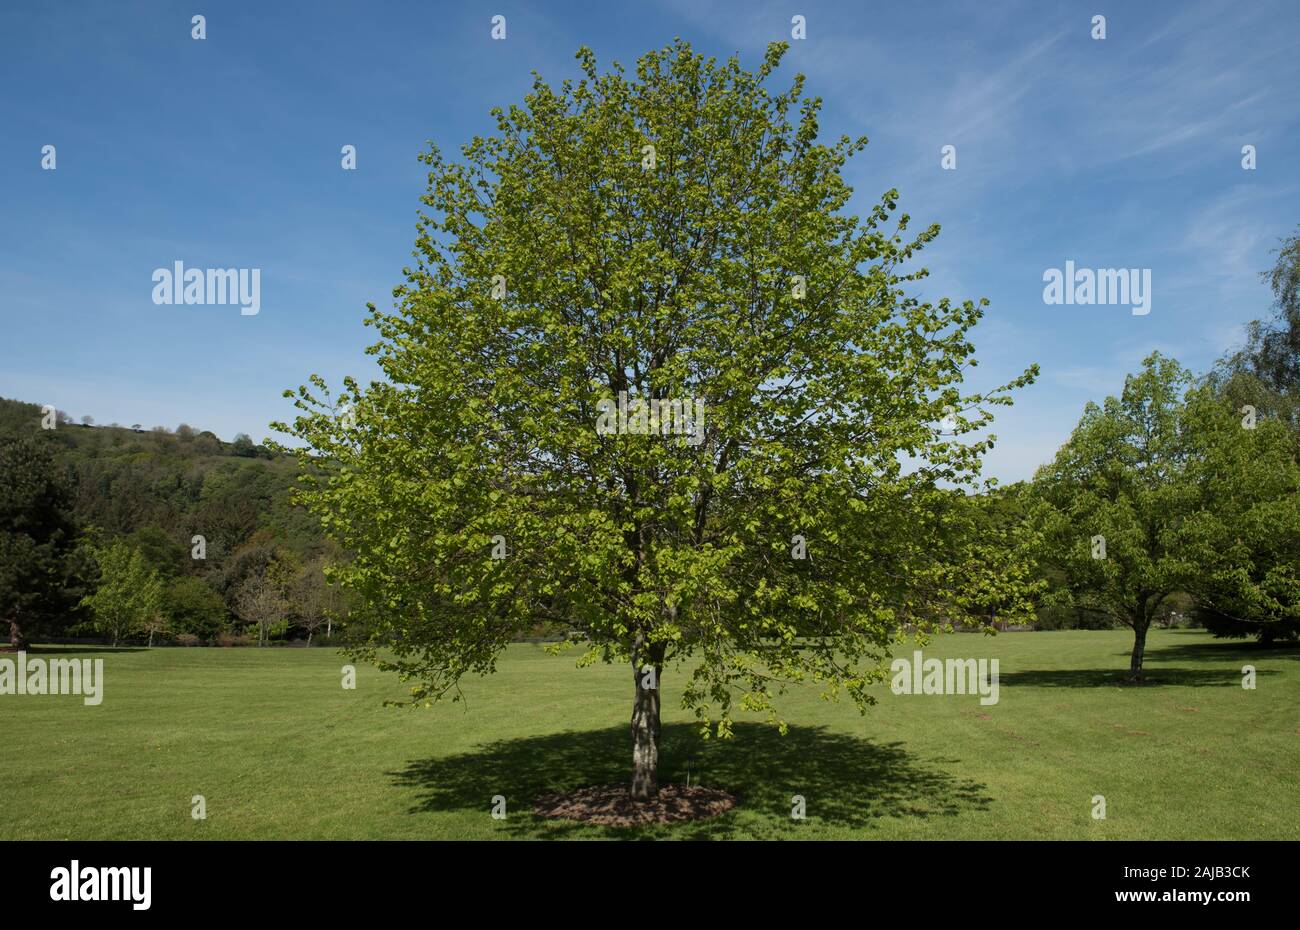 Spring Foliage of a Small Leaved Linden or Lime Tree (Tilia cordata) with a Bright Blue Sky Background in a Park in Rural Devon, England, UK Stock Photo